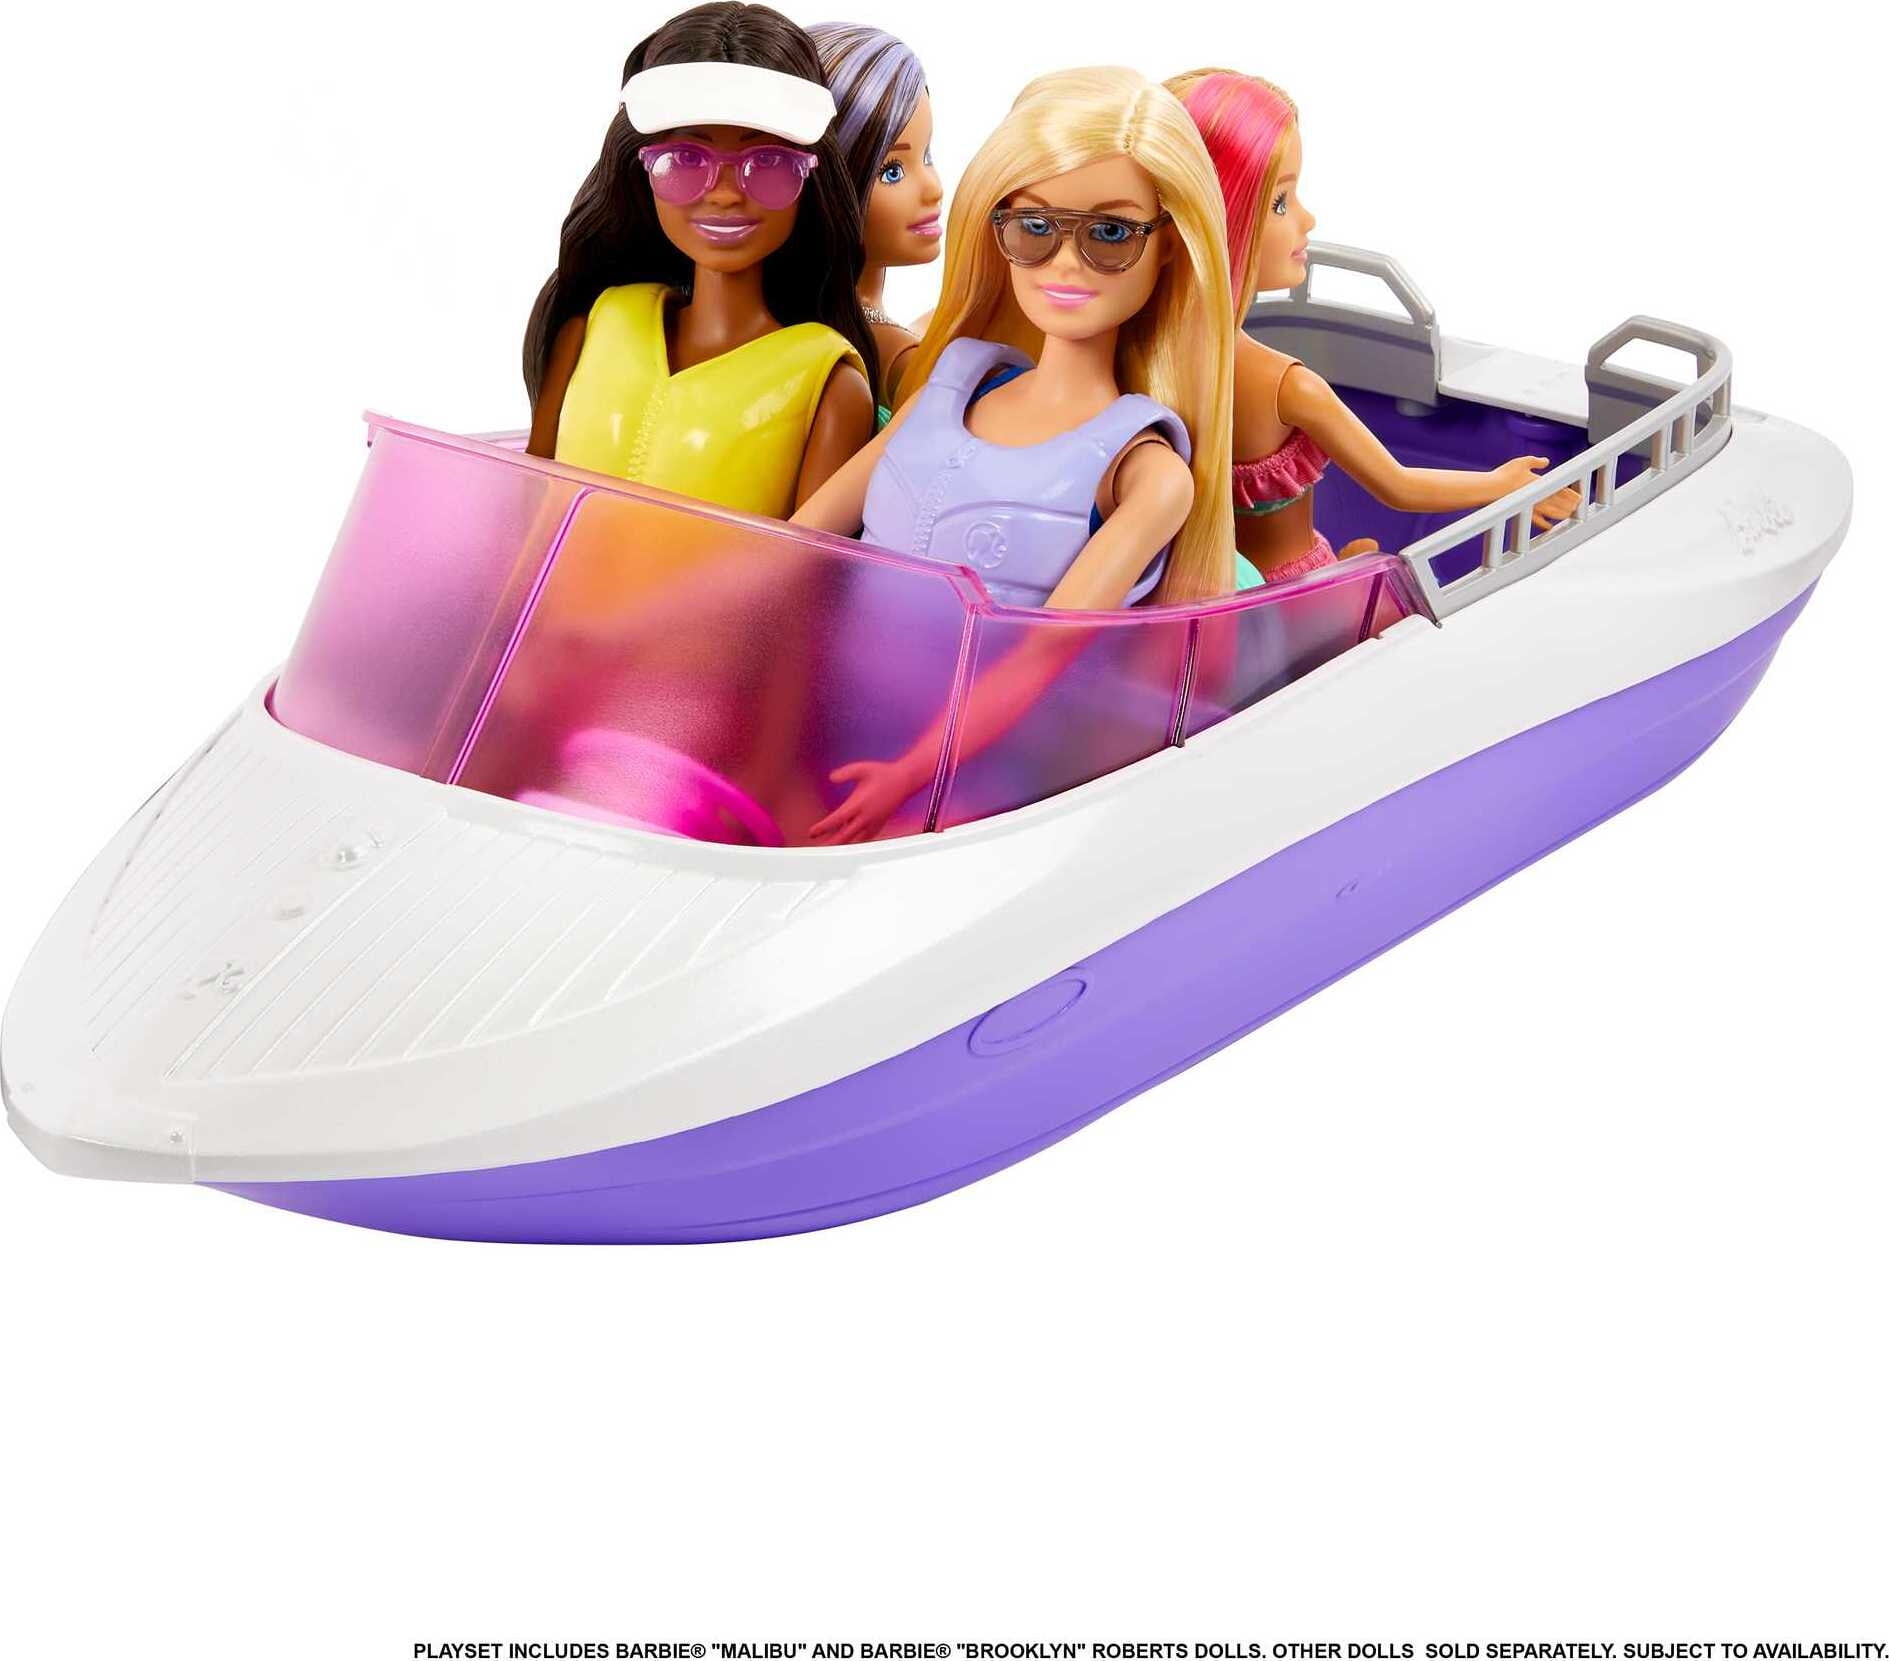 Barbie Mermaid Power Playset with 2 Barbie Dolls & 18-inch Floating Boat  with See-Through Bottom, 4 Seats & Accessories, Toy for 3 Year Olds & Up